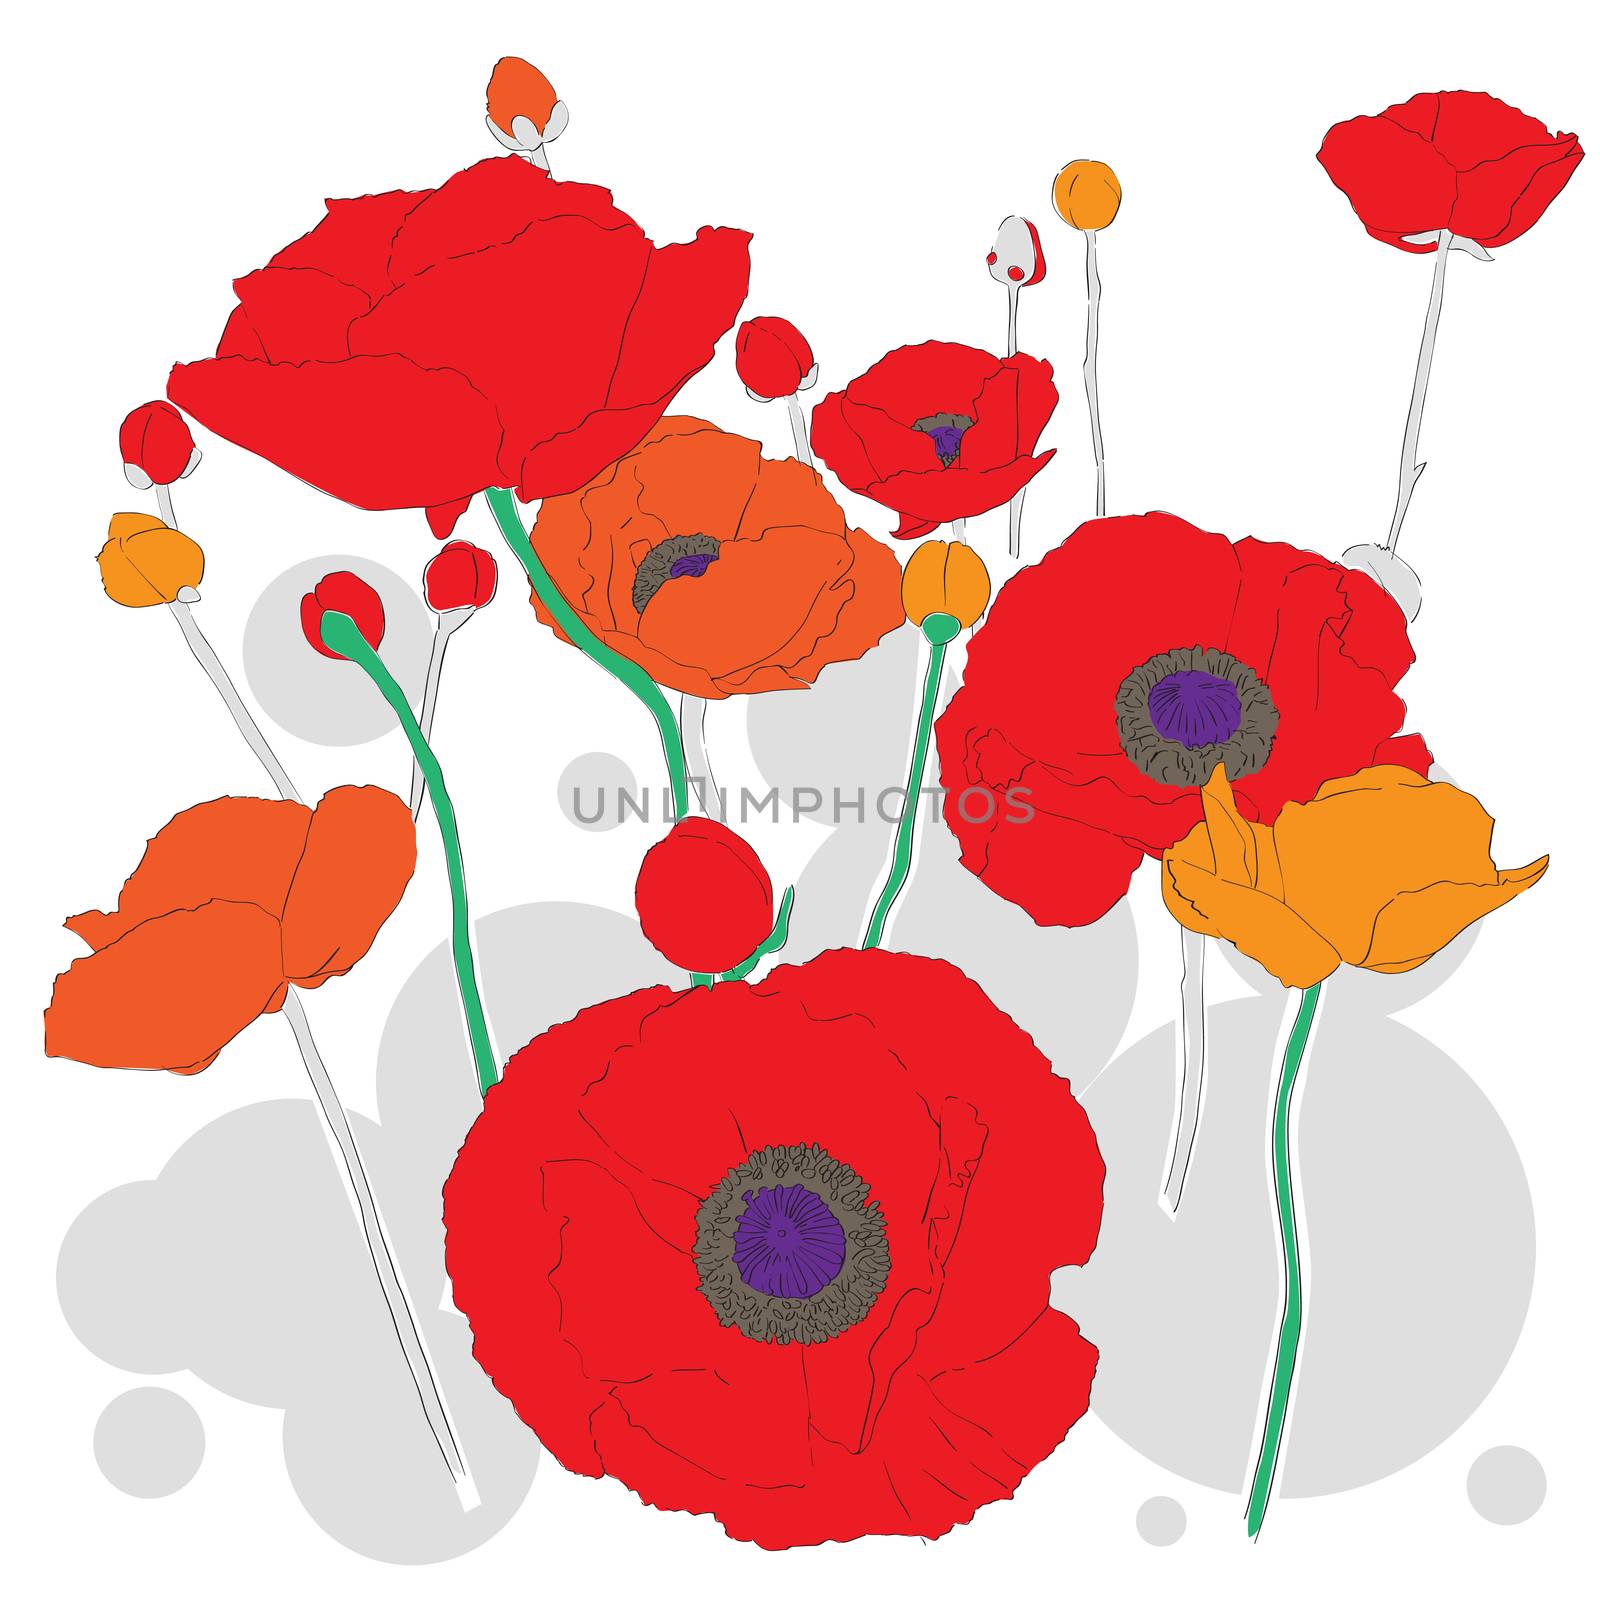 Hand drawn floral decorative composition with poppies and grey bubbles over white